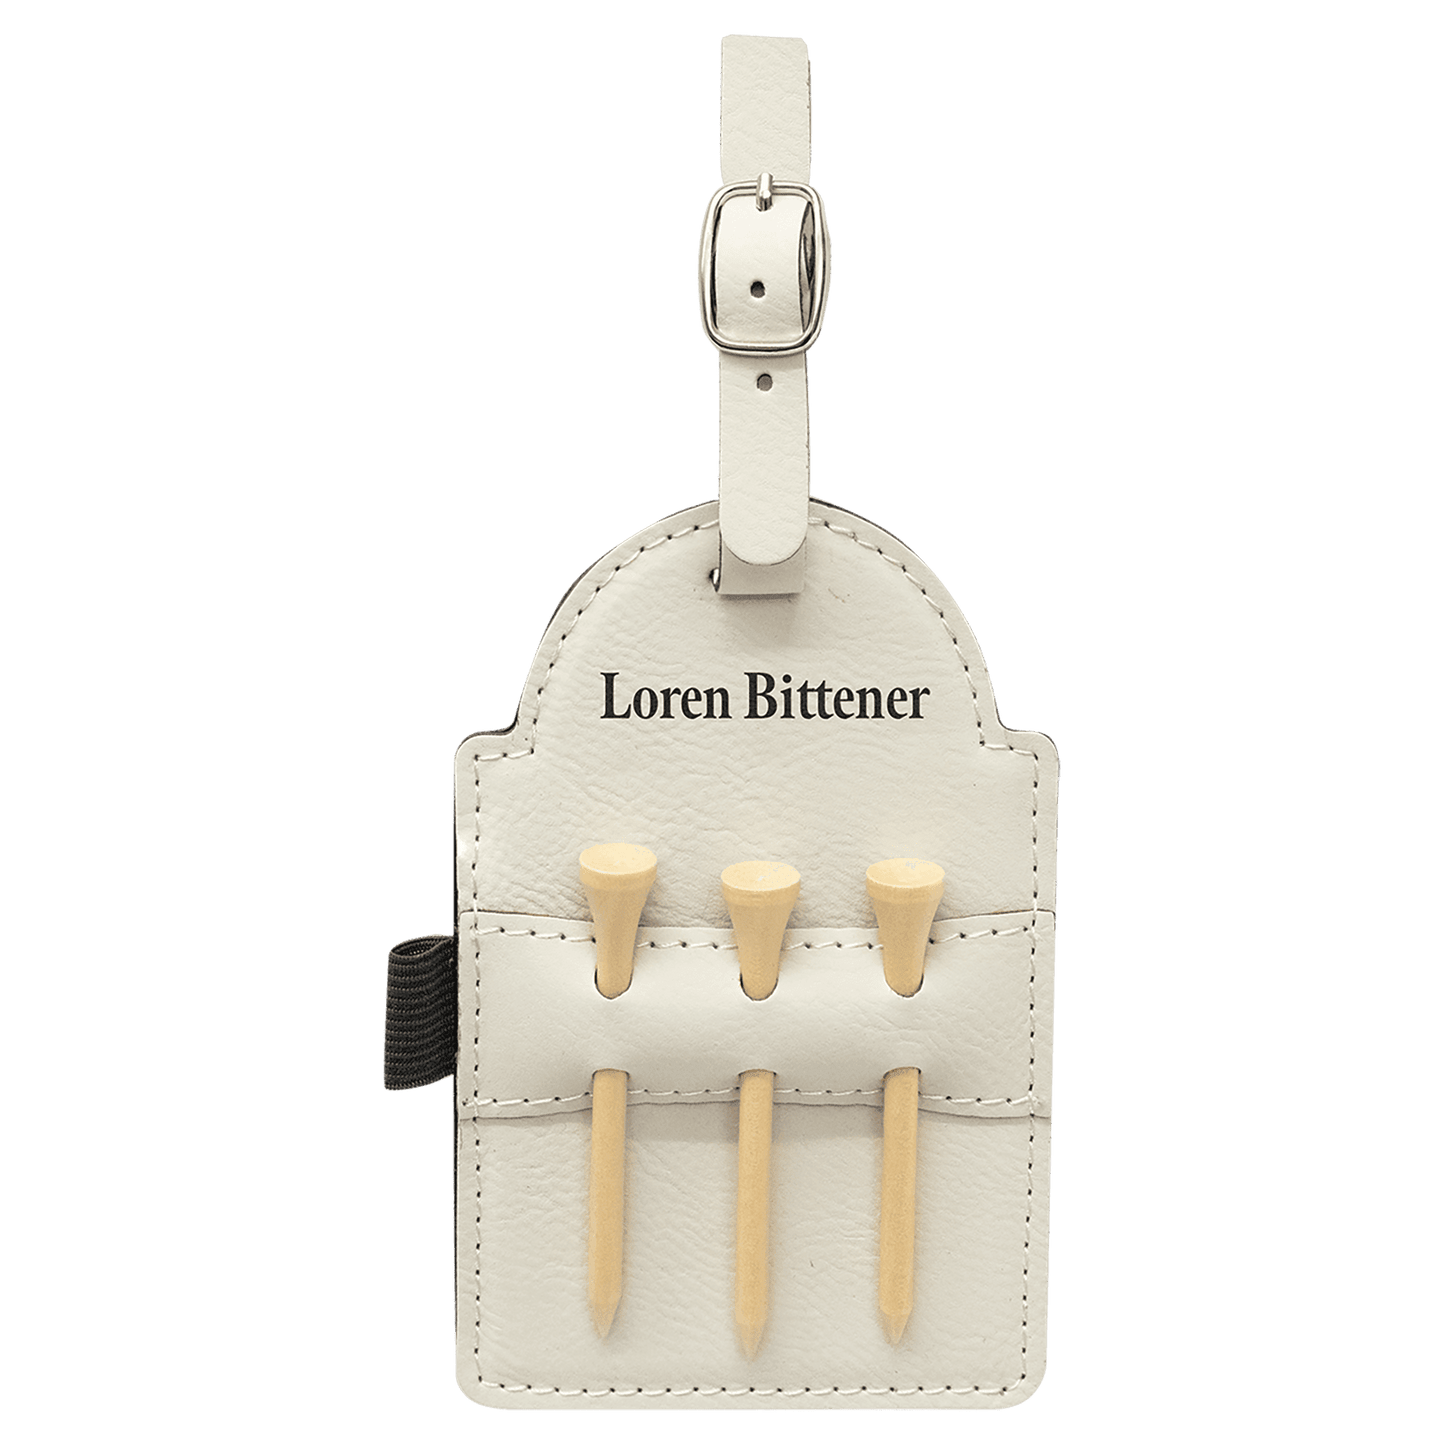 5" x 3 1/4" White Laserable Leatherette Golf Bag Tag with 3 Wooden Tees